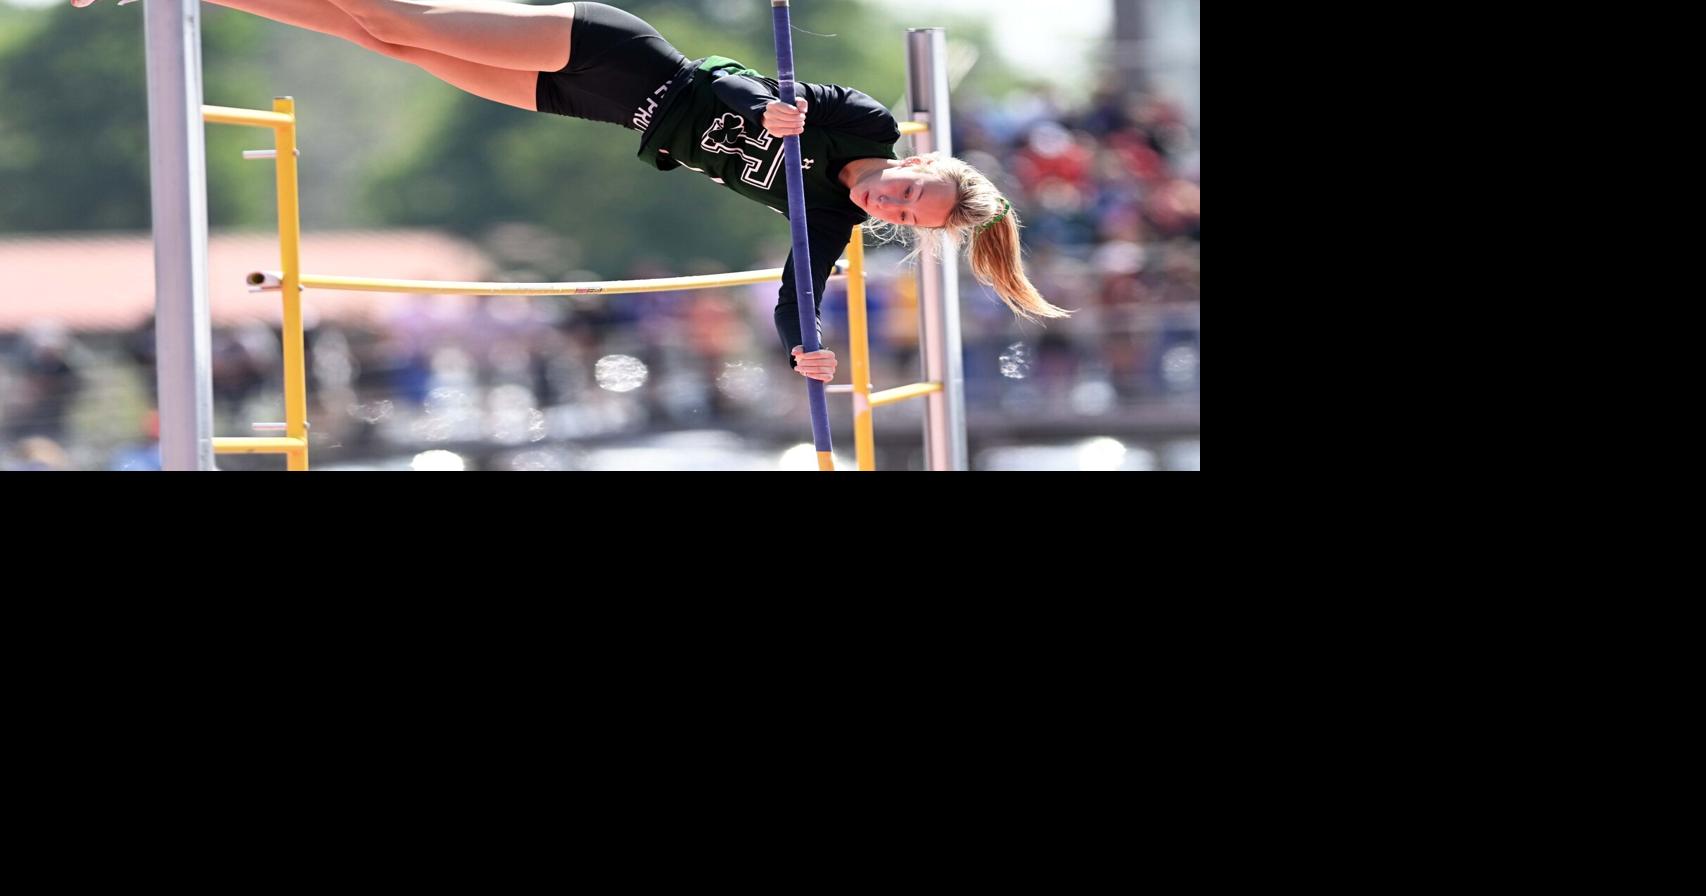 Trinity’s Adeline Woodward pole vaults to rising stars runner-up finish at New Balance Nationals